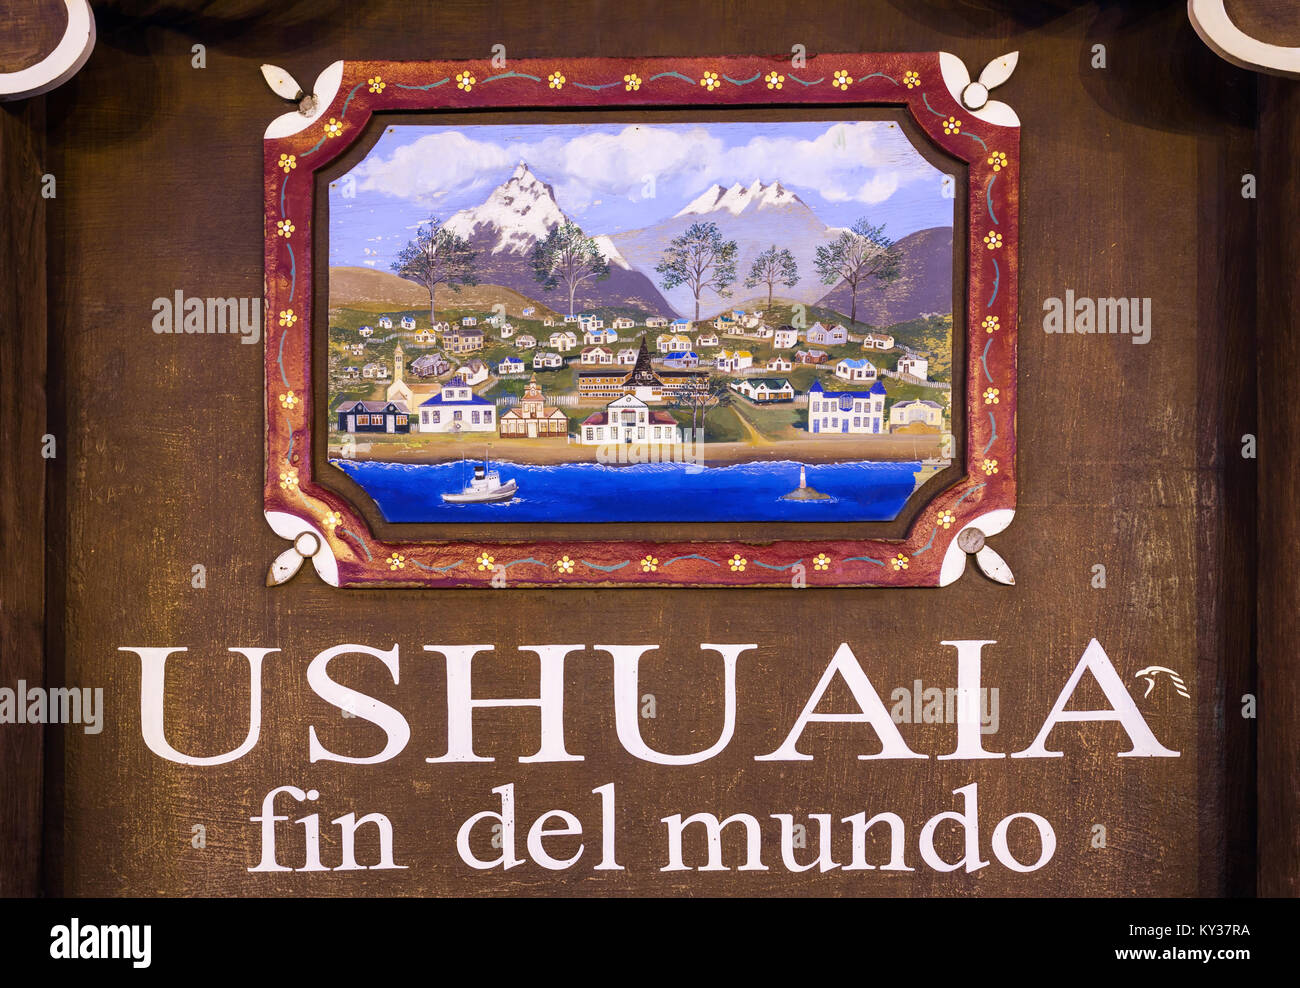 USHUAIA, ARGENTINA - APRIL 15, 2016: Ushuaia Fin Del Mundo (End Of The World) sign. Ushuaia is the capital of Tierra del Fuego province in Argentina. Stock Photo